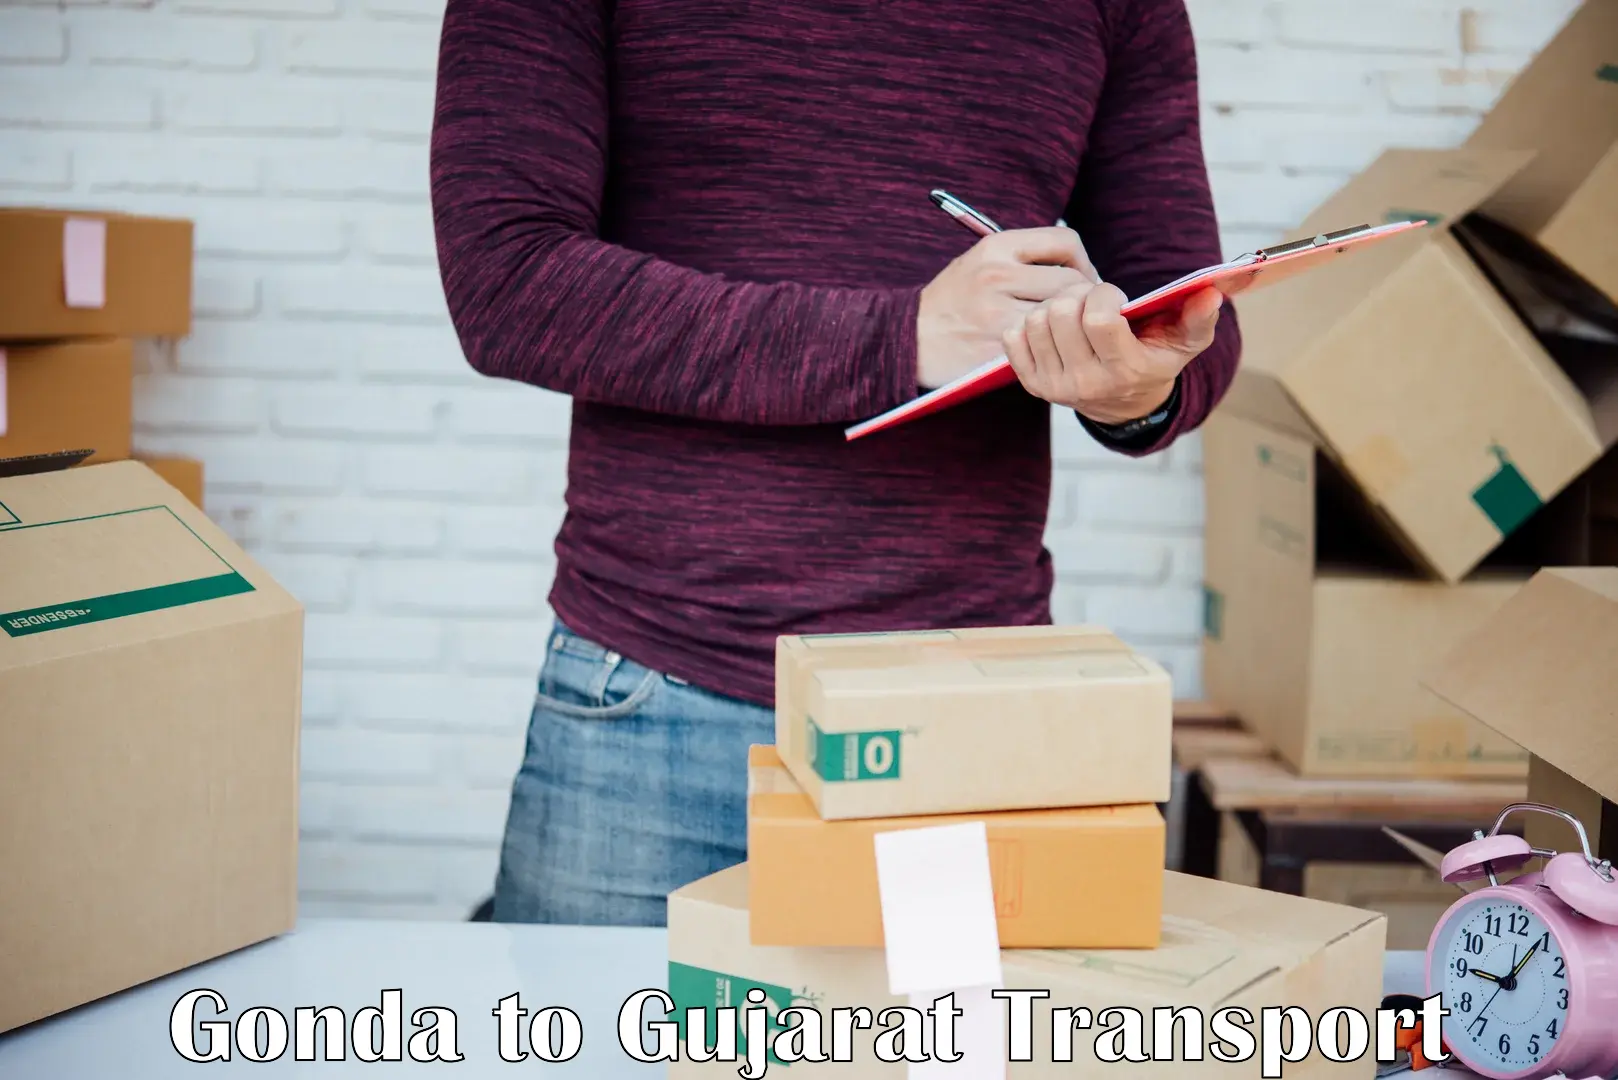 Express transport services Gonda to Ahmedabad